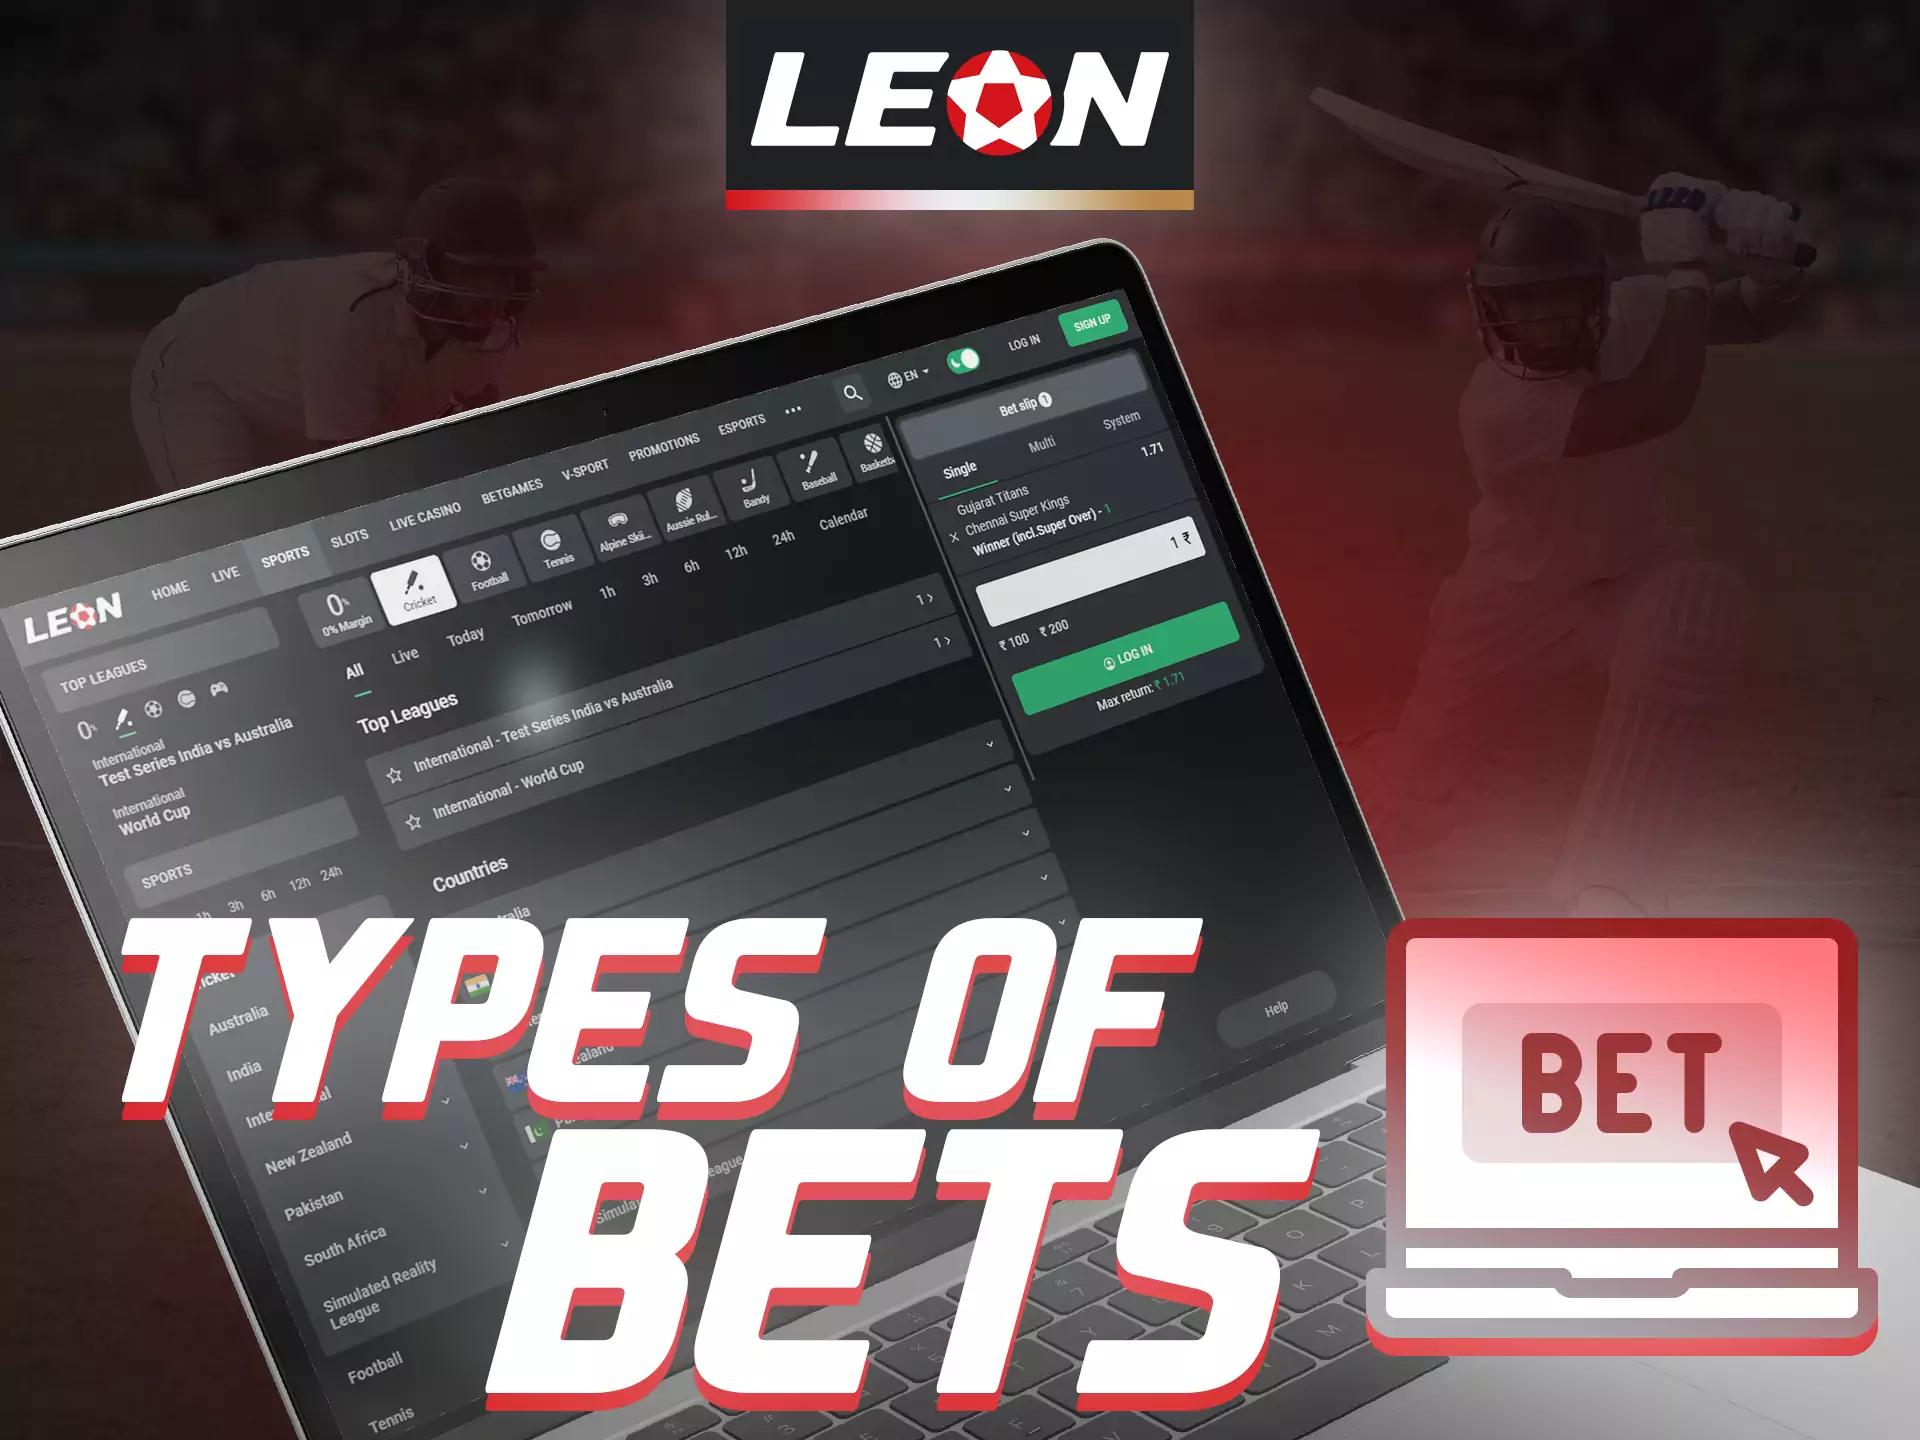 There are different types of bets available to you on Leonbet.